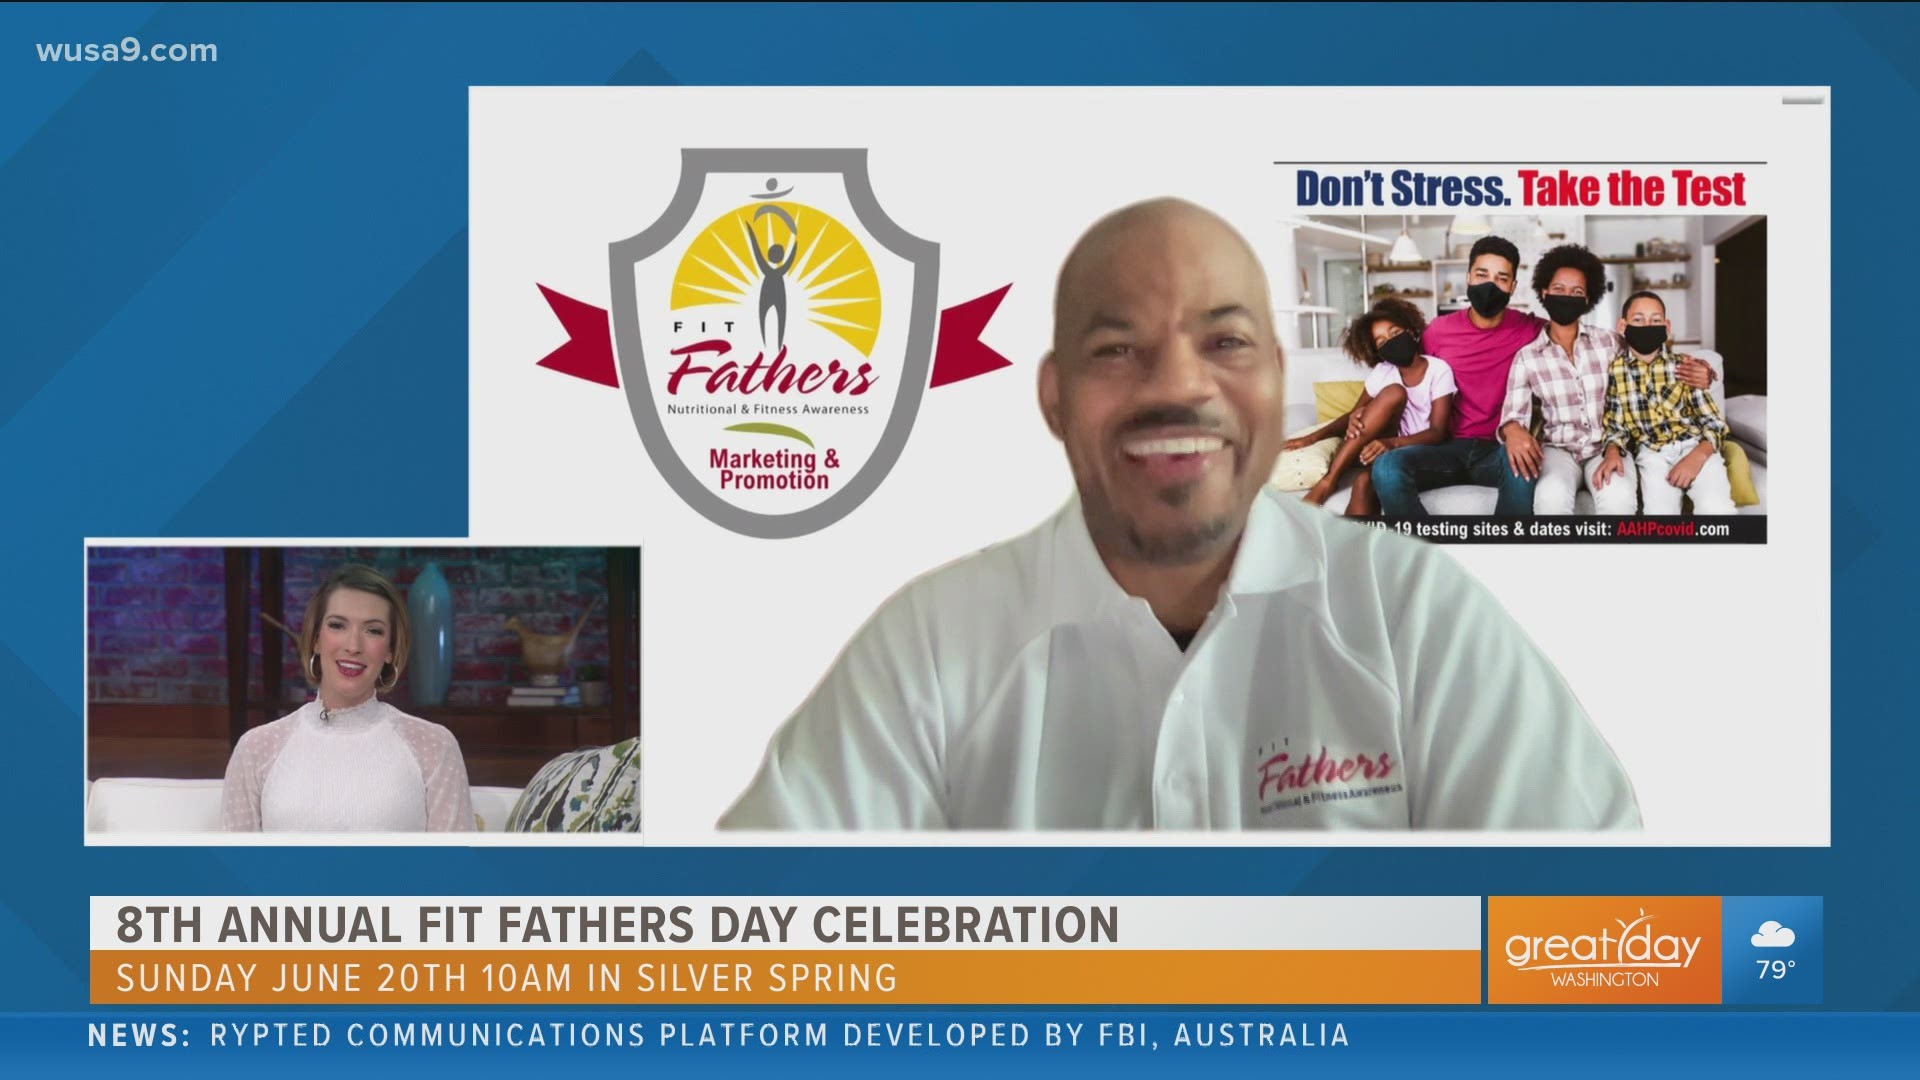 Kimatni Rawlins, founder of The Fit Fathers Foundation talks about the free event that features six different trainers and nutrition tips for the whole family.